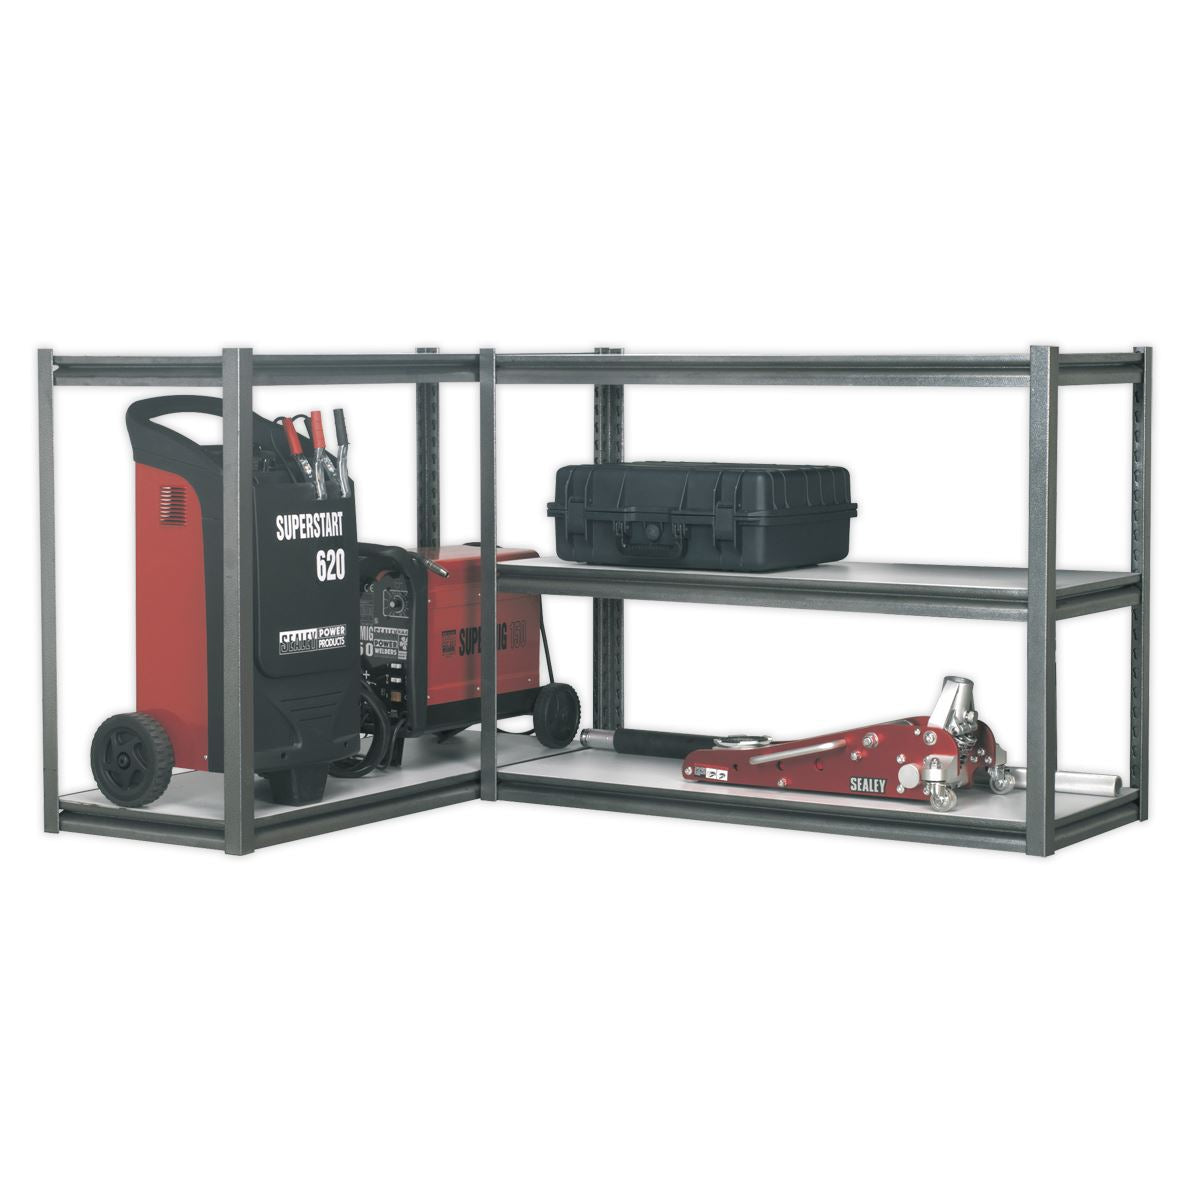 Sealey Racking Unit with 5 Shelves 600kg Capacity Per Level